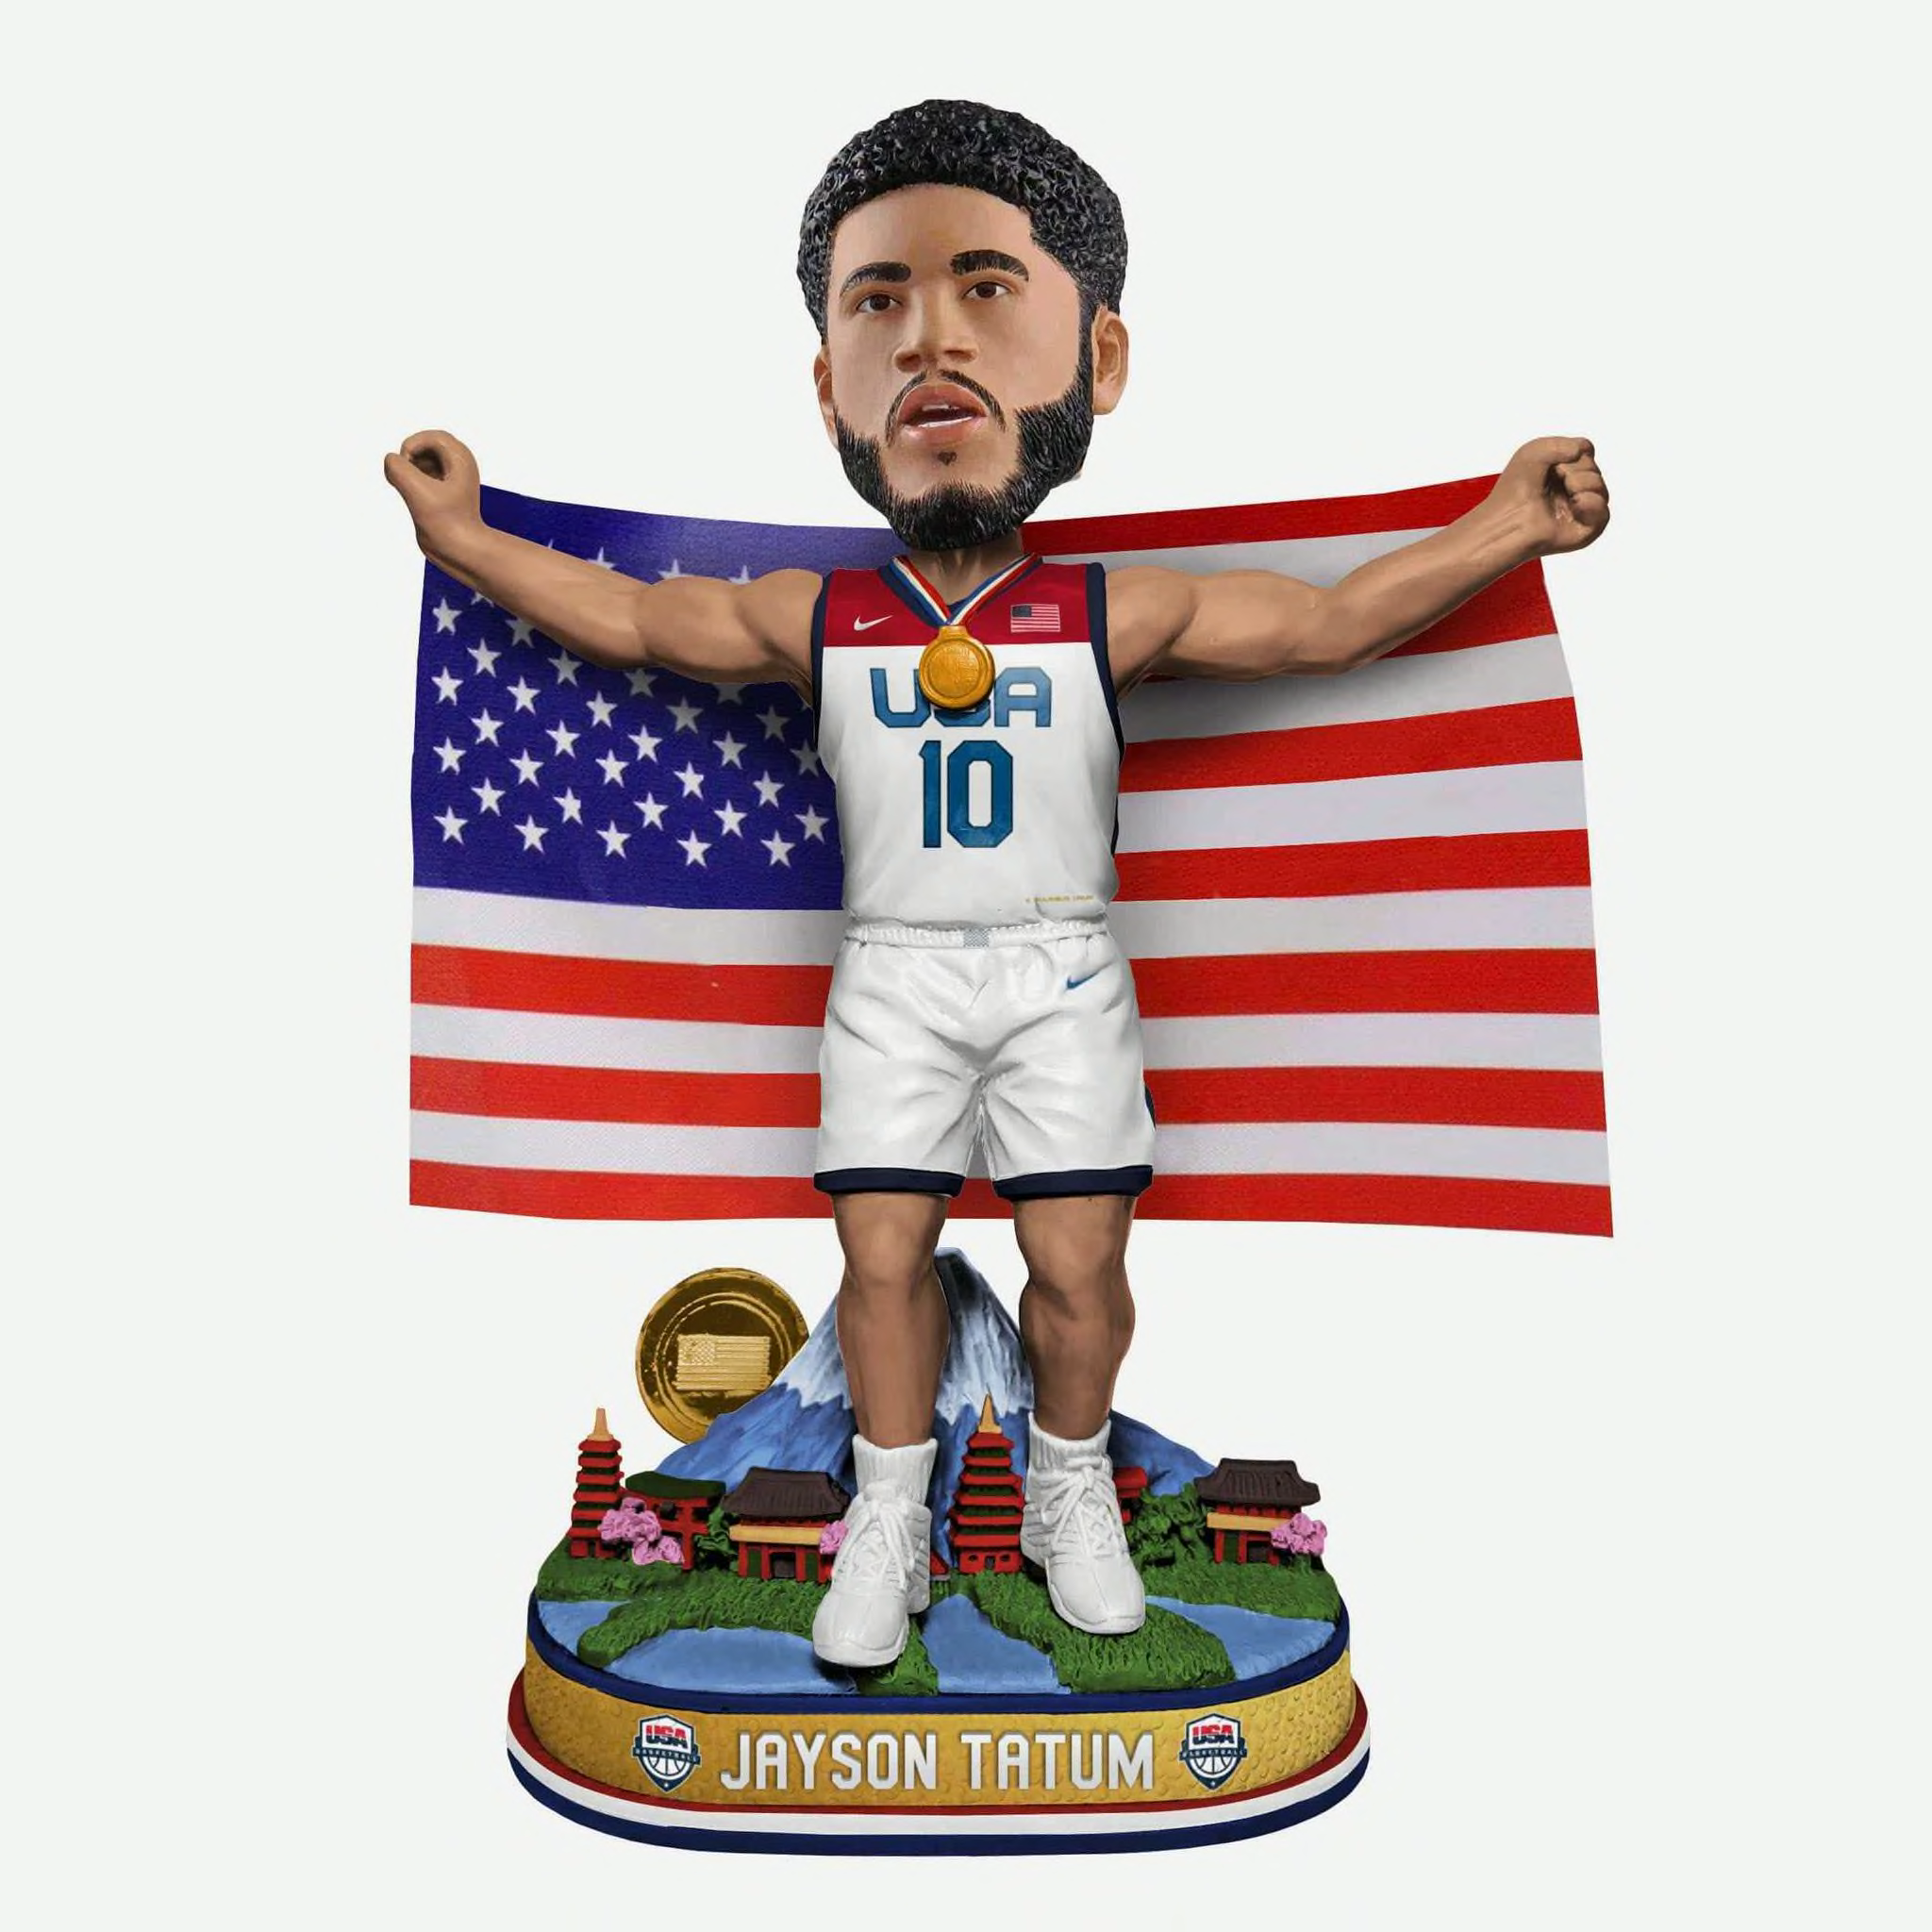 Celebrate Team Usa S Gold With New Bobbleheads